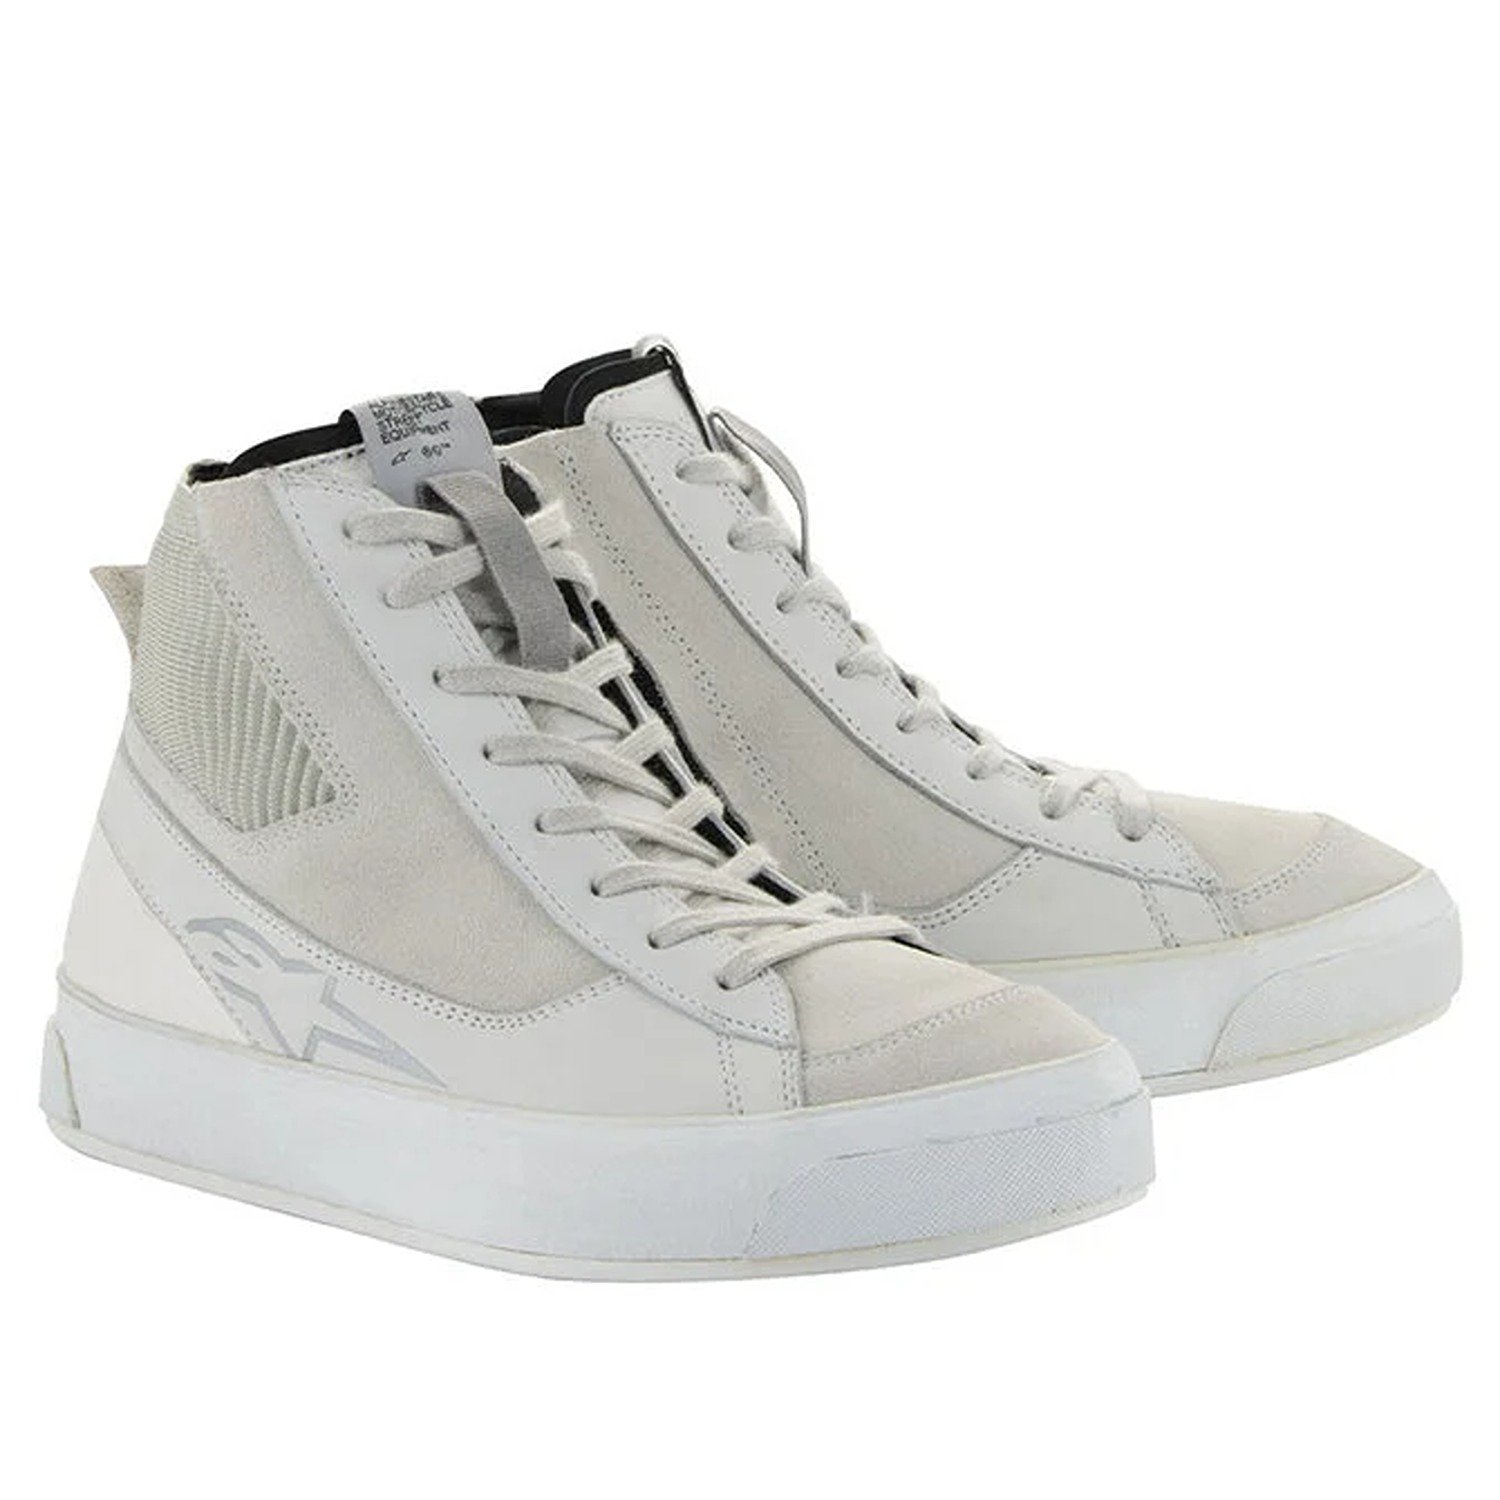 Image of Alpinestars Stella Stated Podium Shoes White Cool Gray Taille US 10